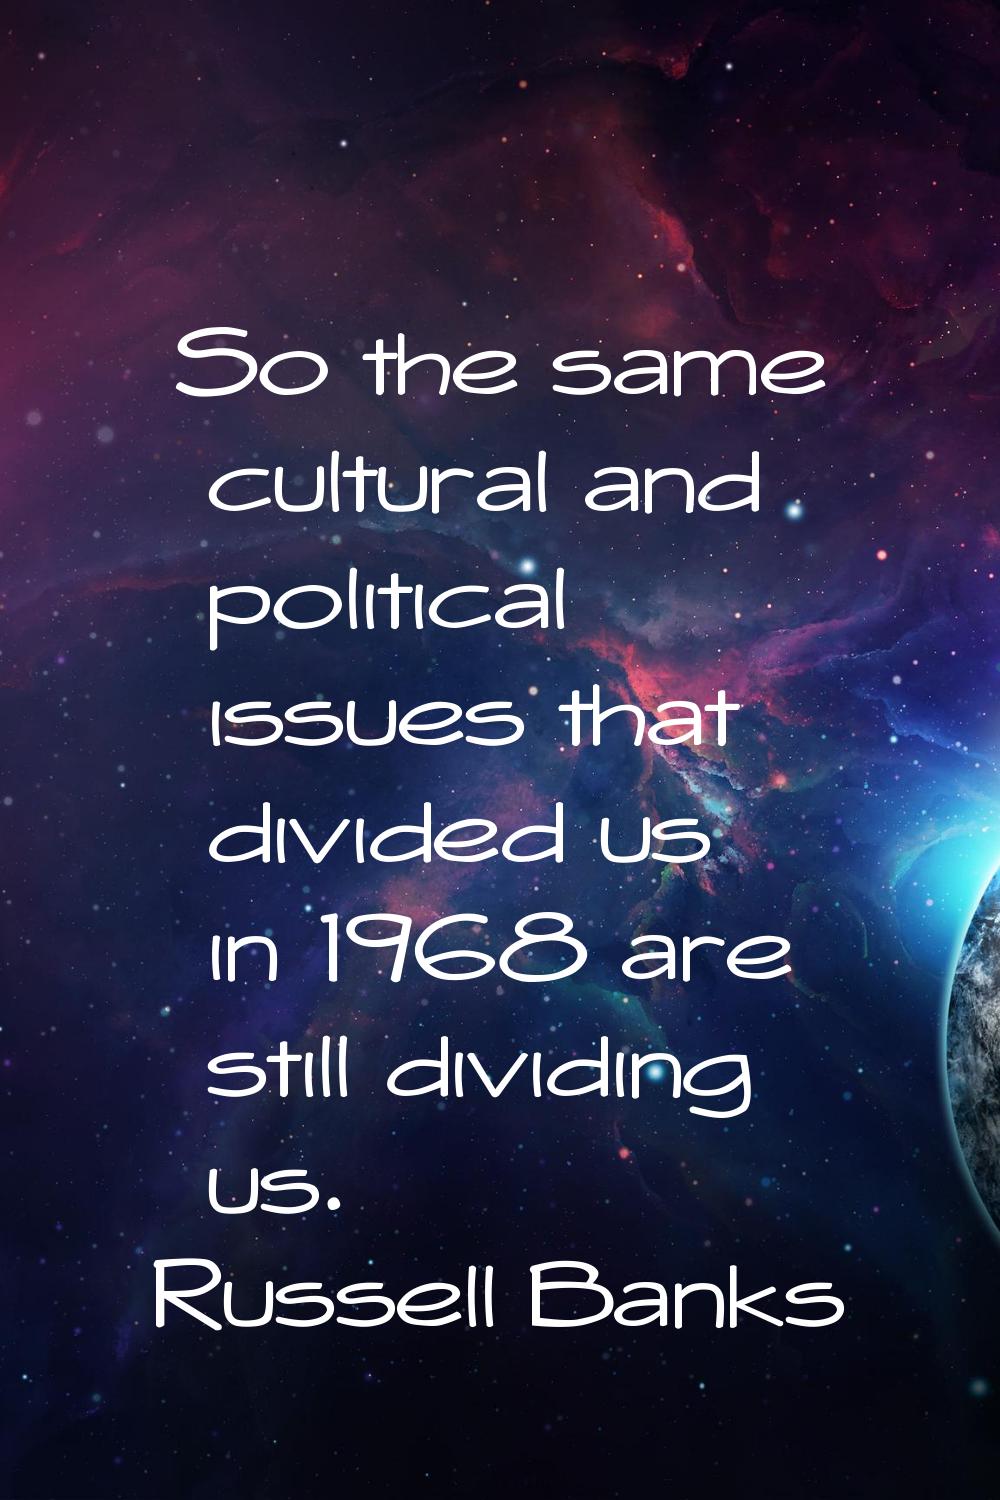 So the same cultural and political issues that divided us in 1968 are still dividing us.